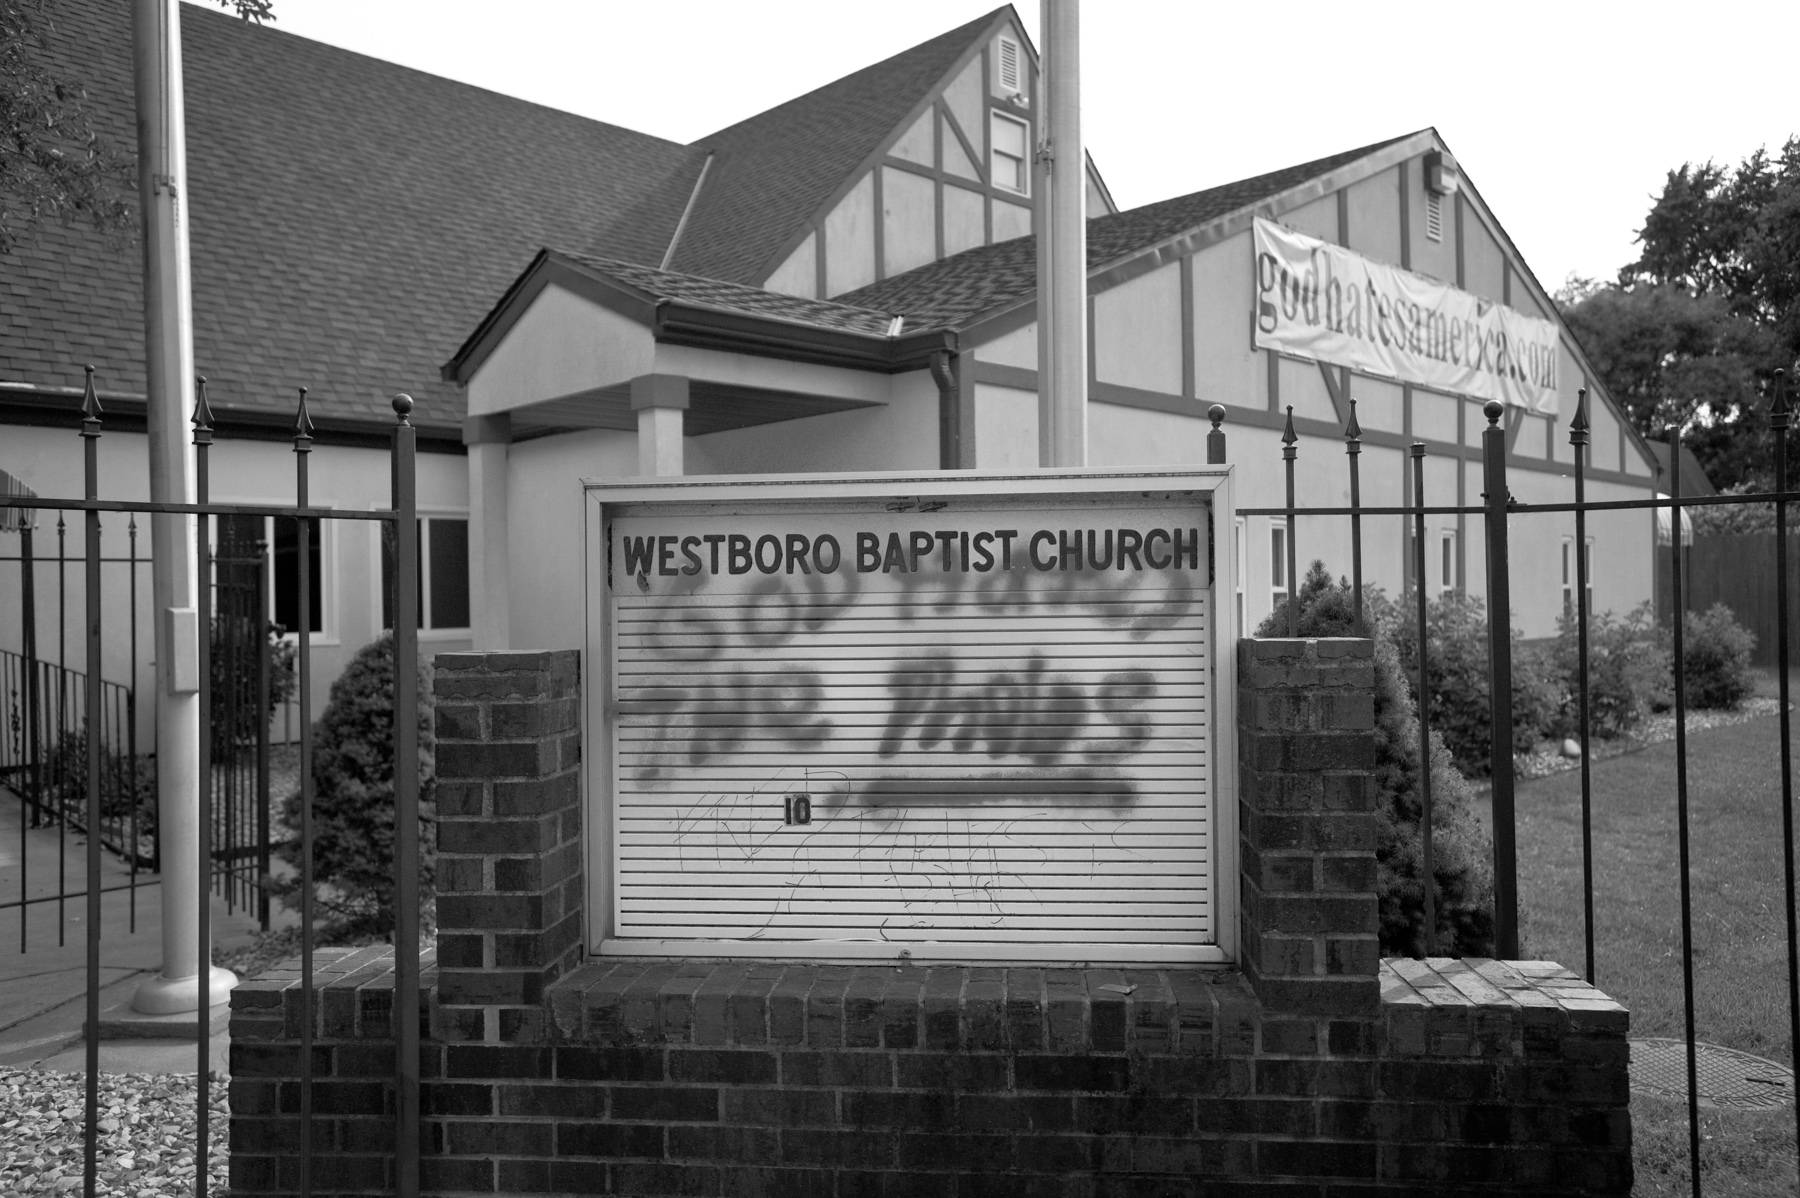 Graffiti defaces the sign of the Westboro Baptist Church.